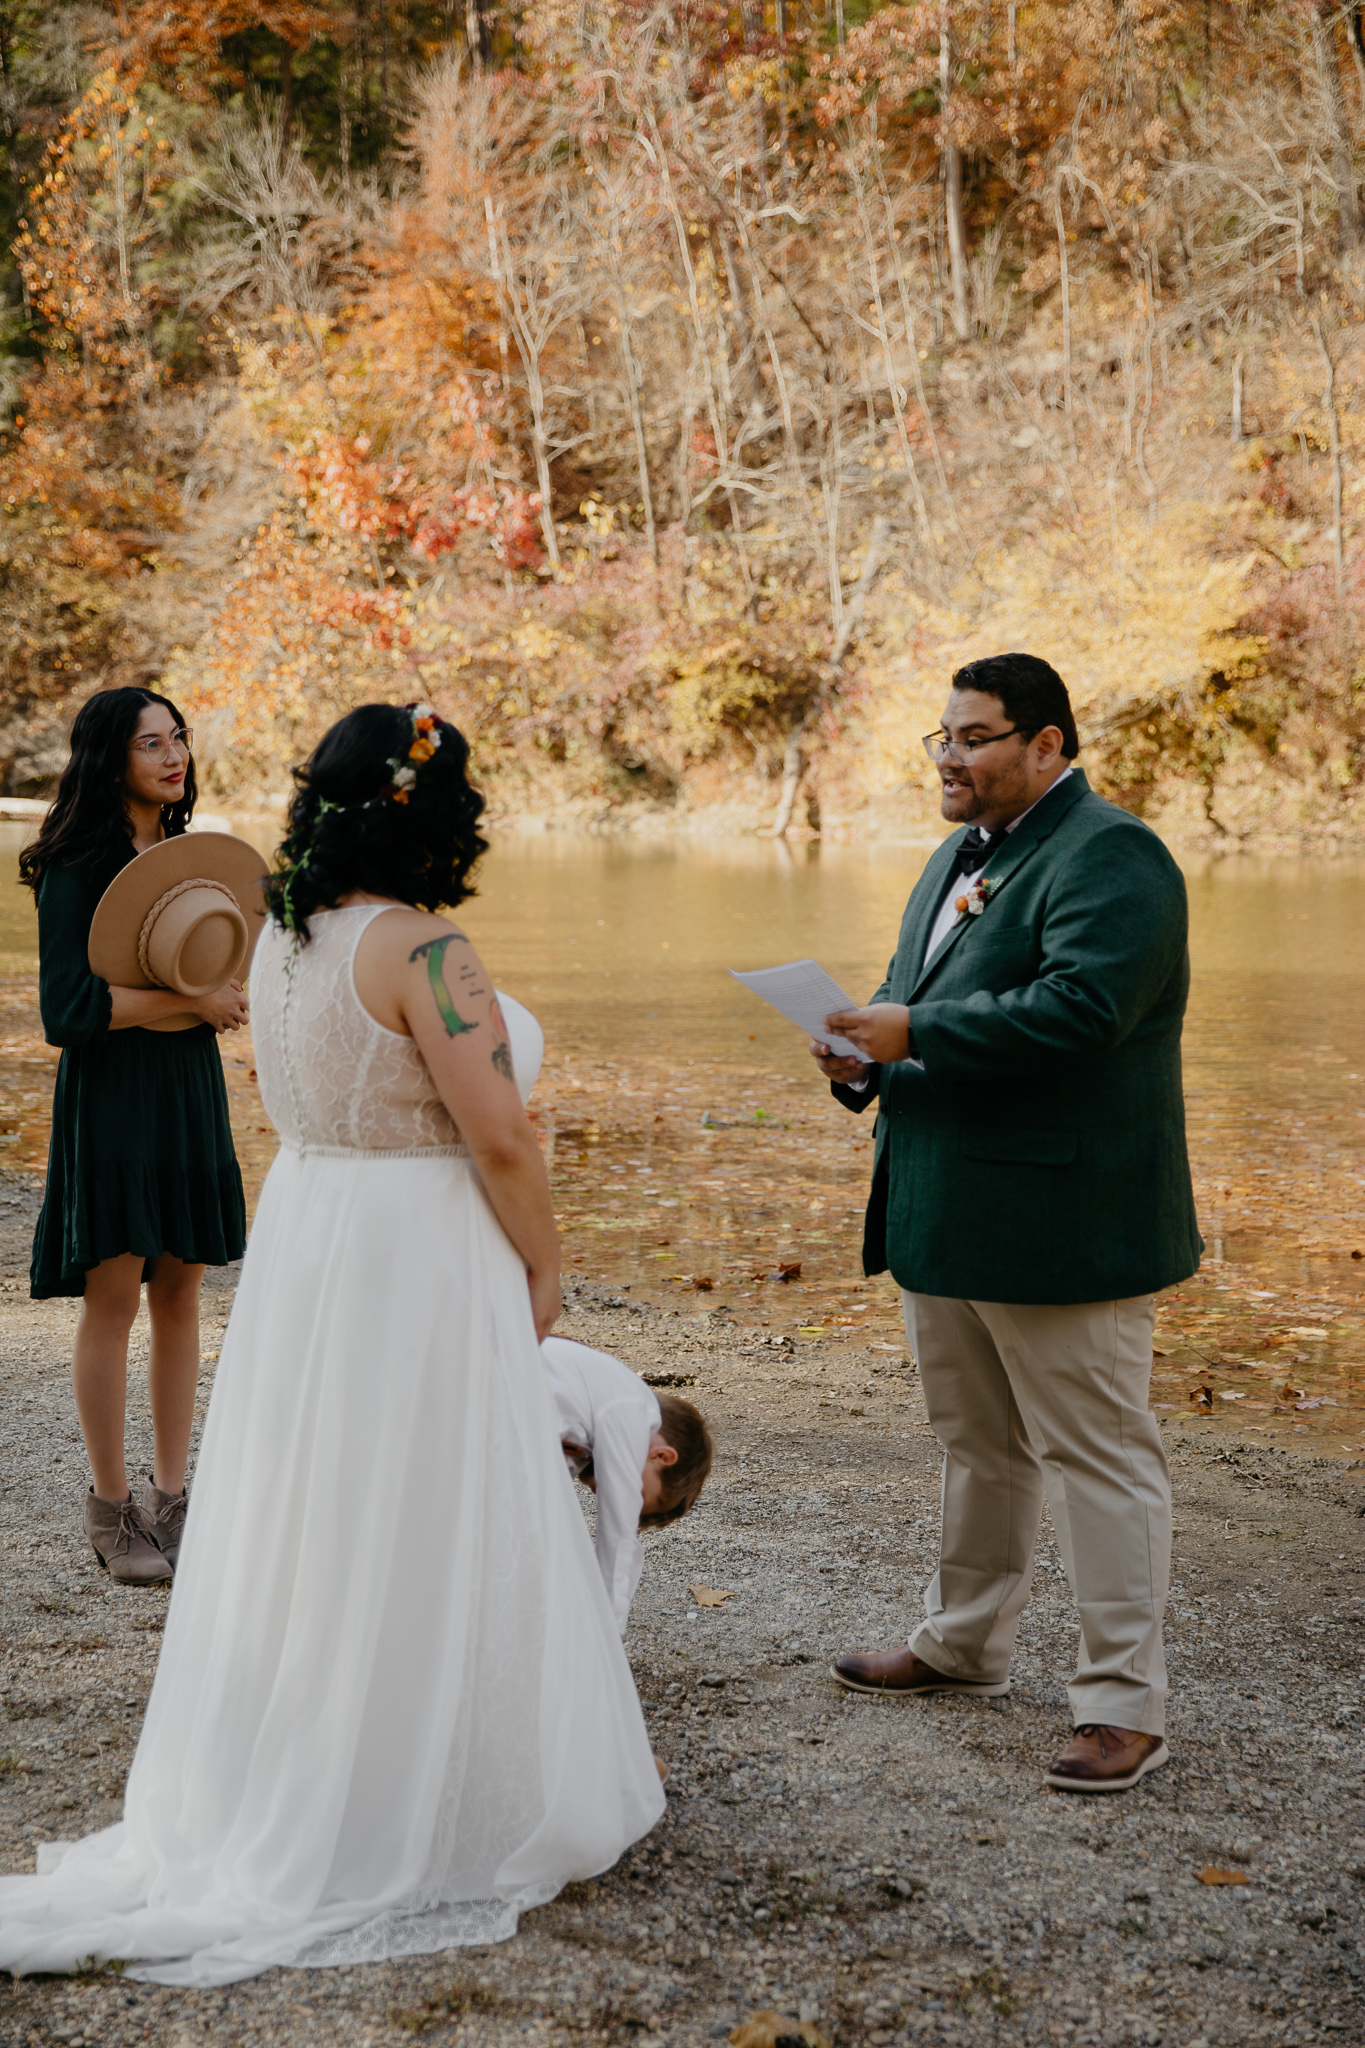 A groom shares his vows with his bride and son at their autumn elopement in Turkey Run State Park, Indiana